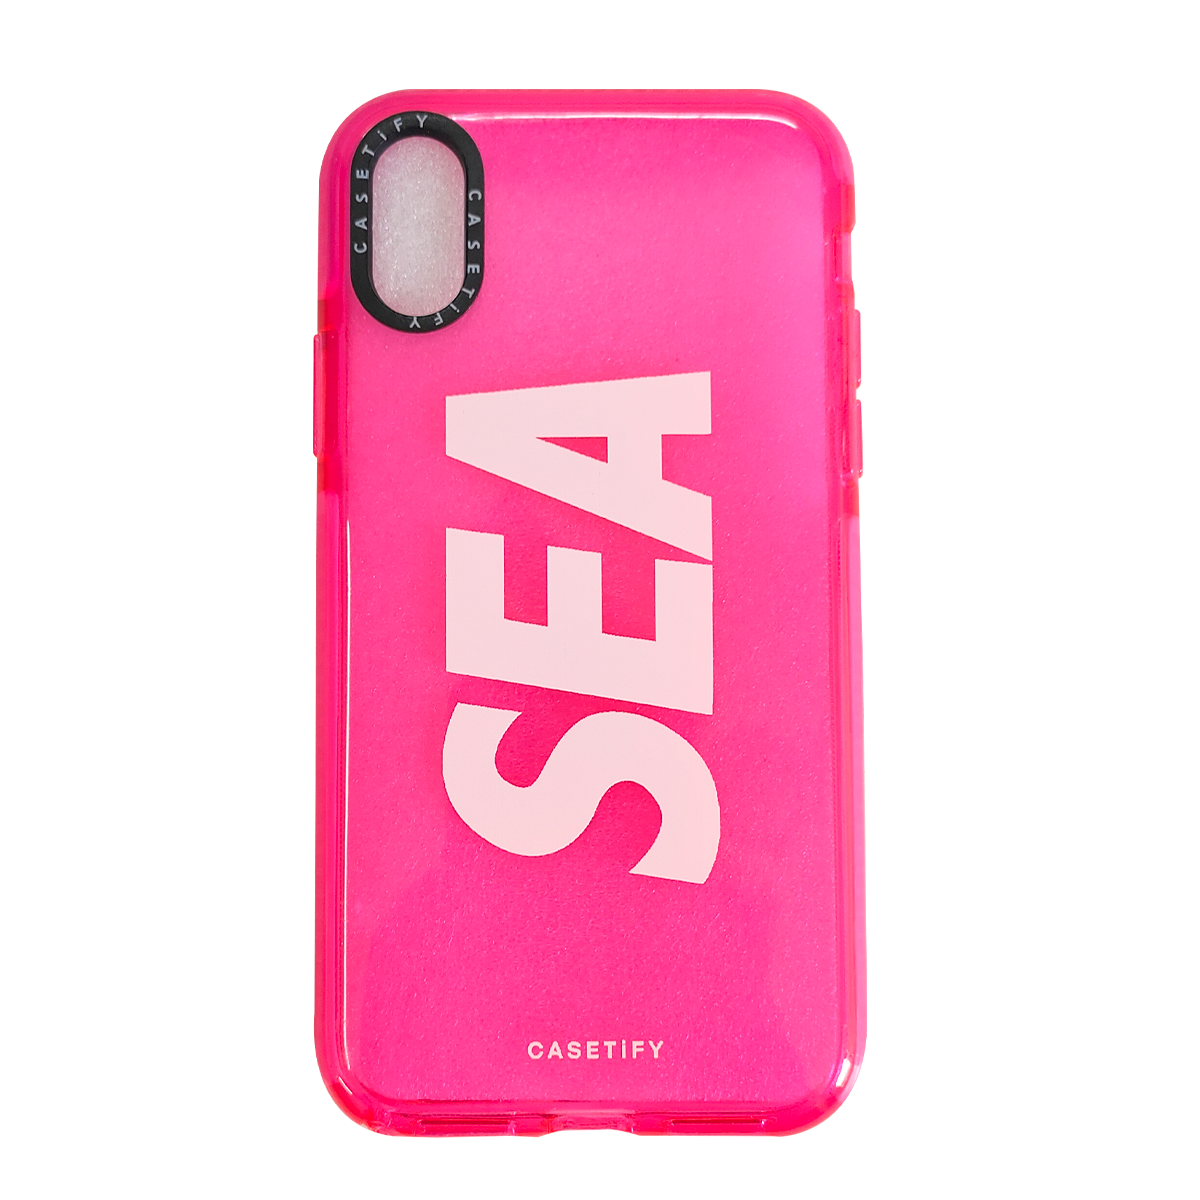 Casetify Sea Cases for iPhone XS MAX (Rose)